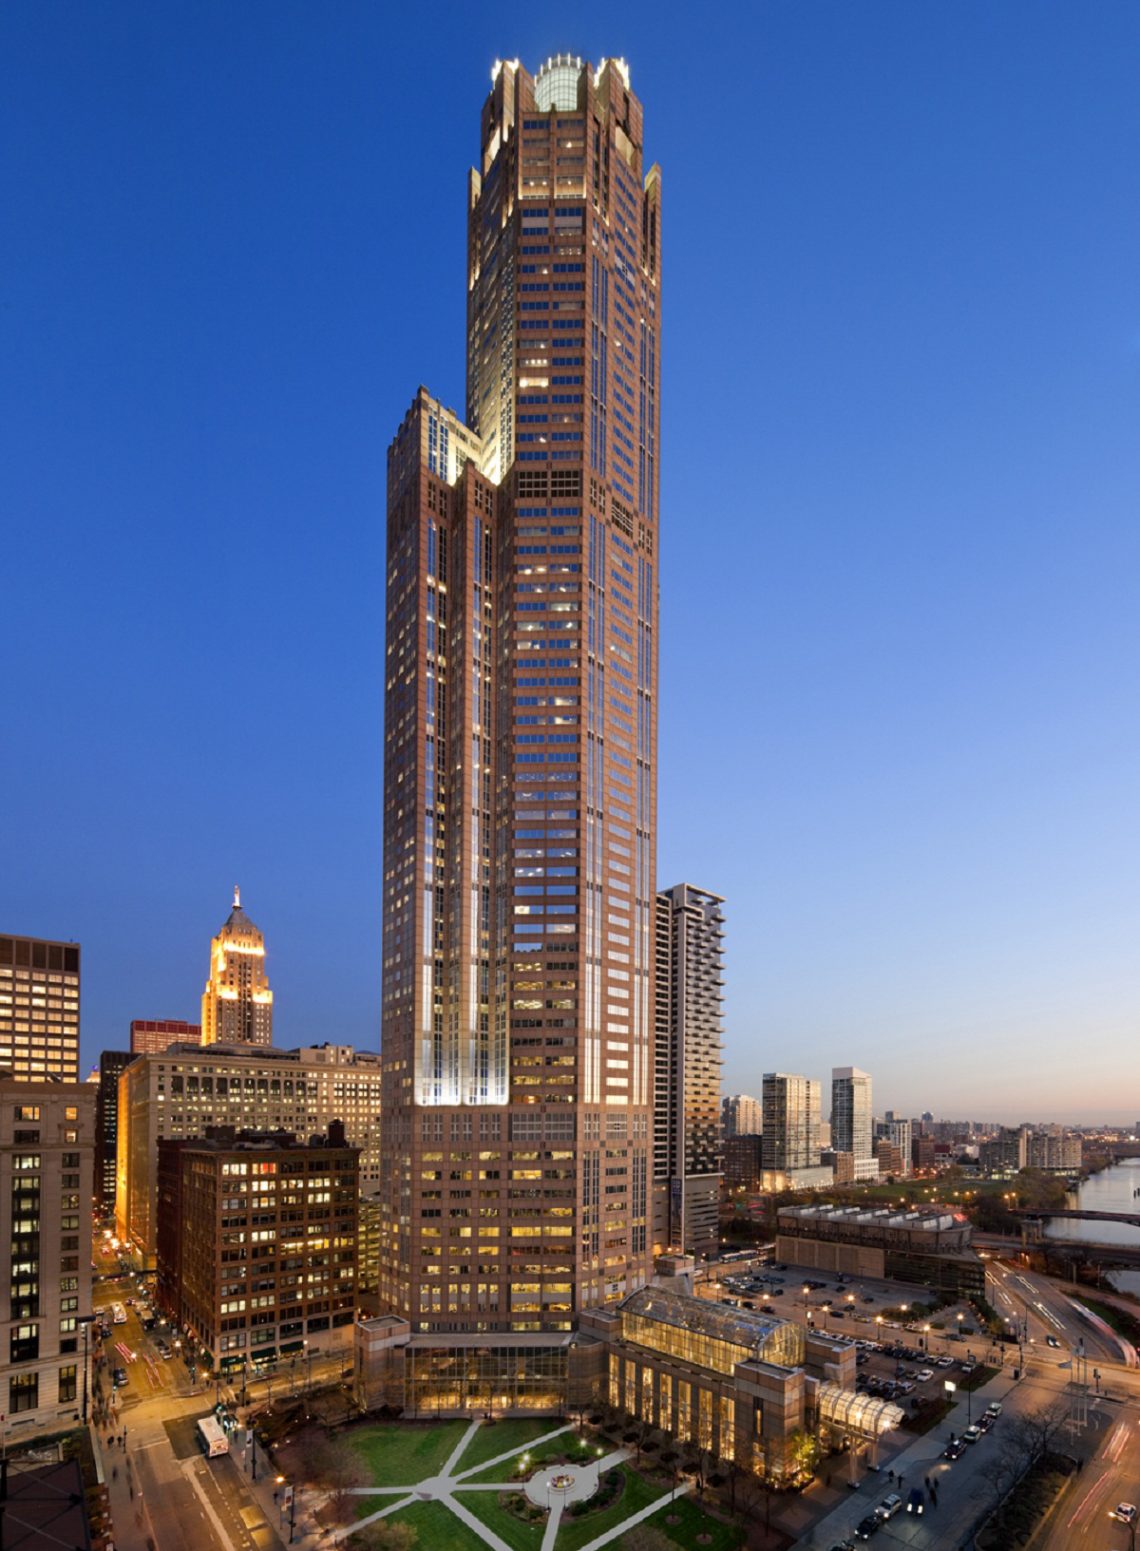 Full view of 311 South Wacker and surrounding landscape at dusk